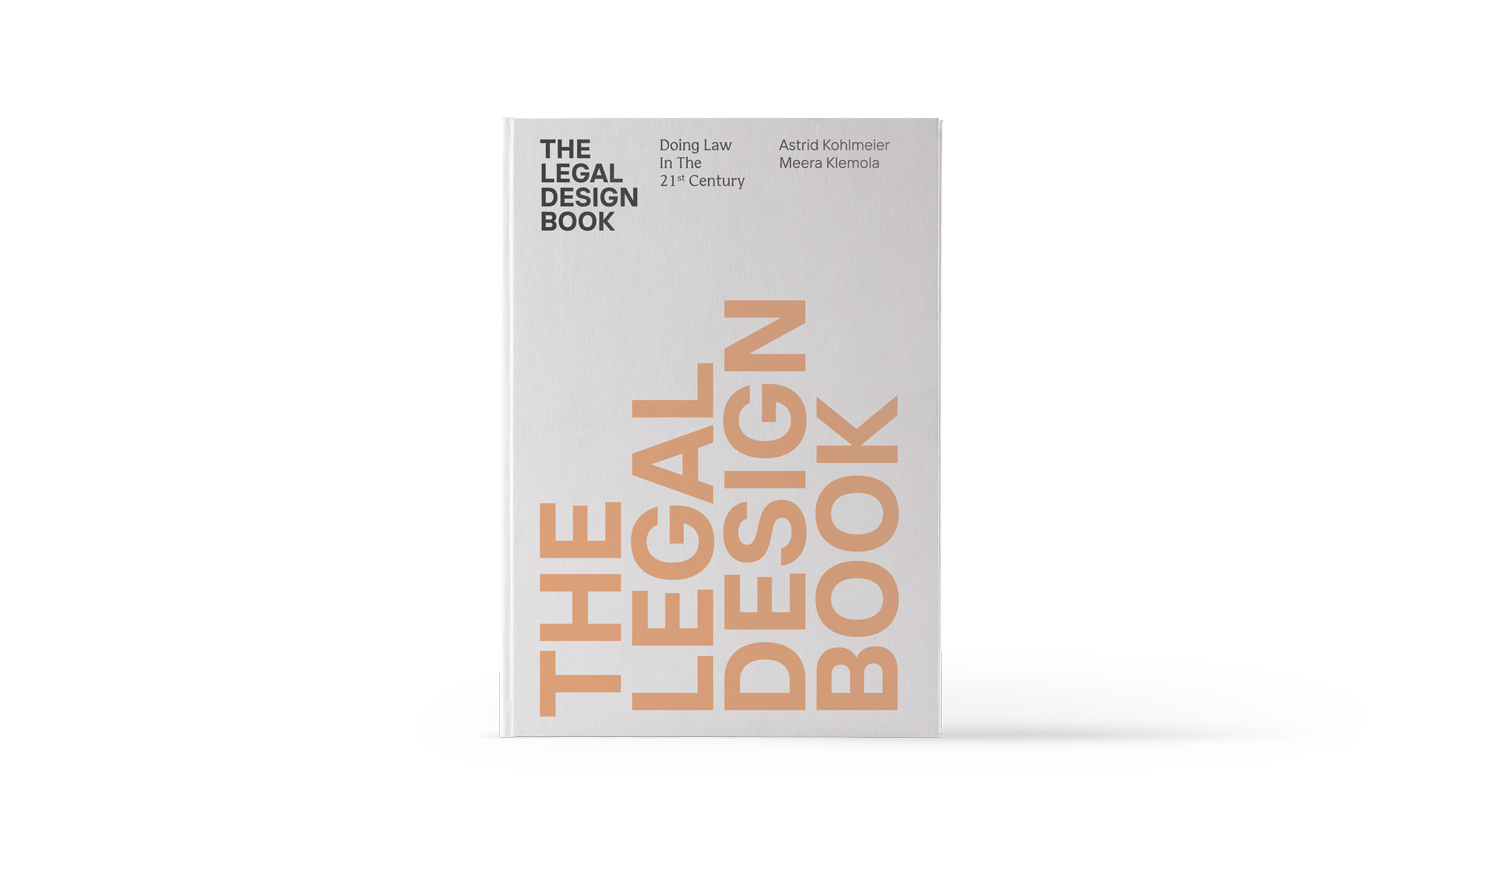 THE LEGAL DESIGN BOOK – Doing Law In The 21st Century – Buy Now!